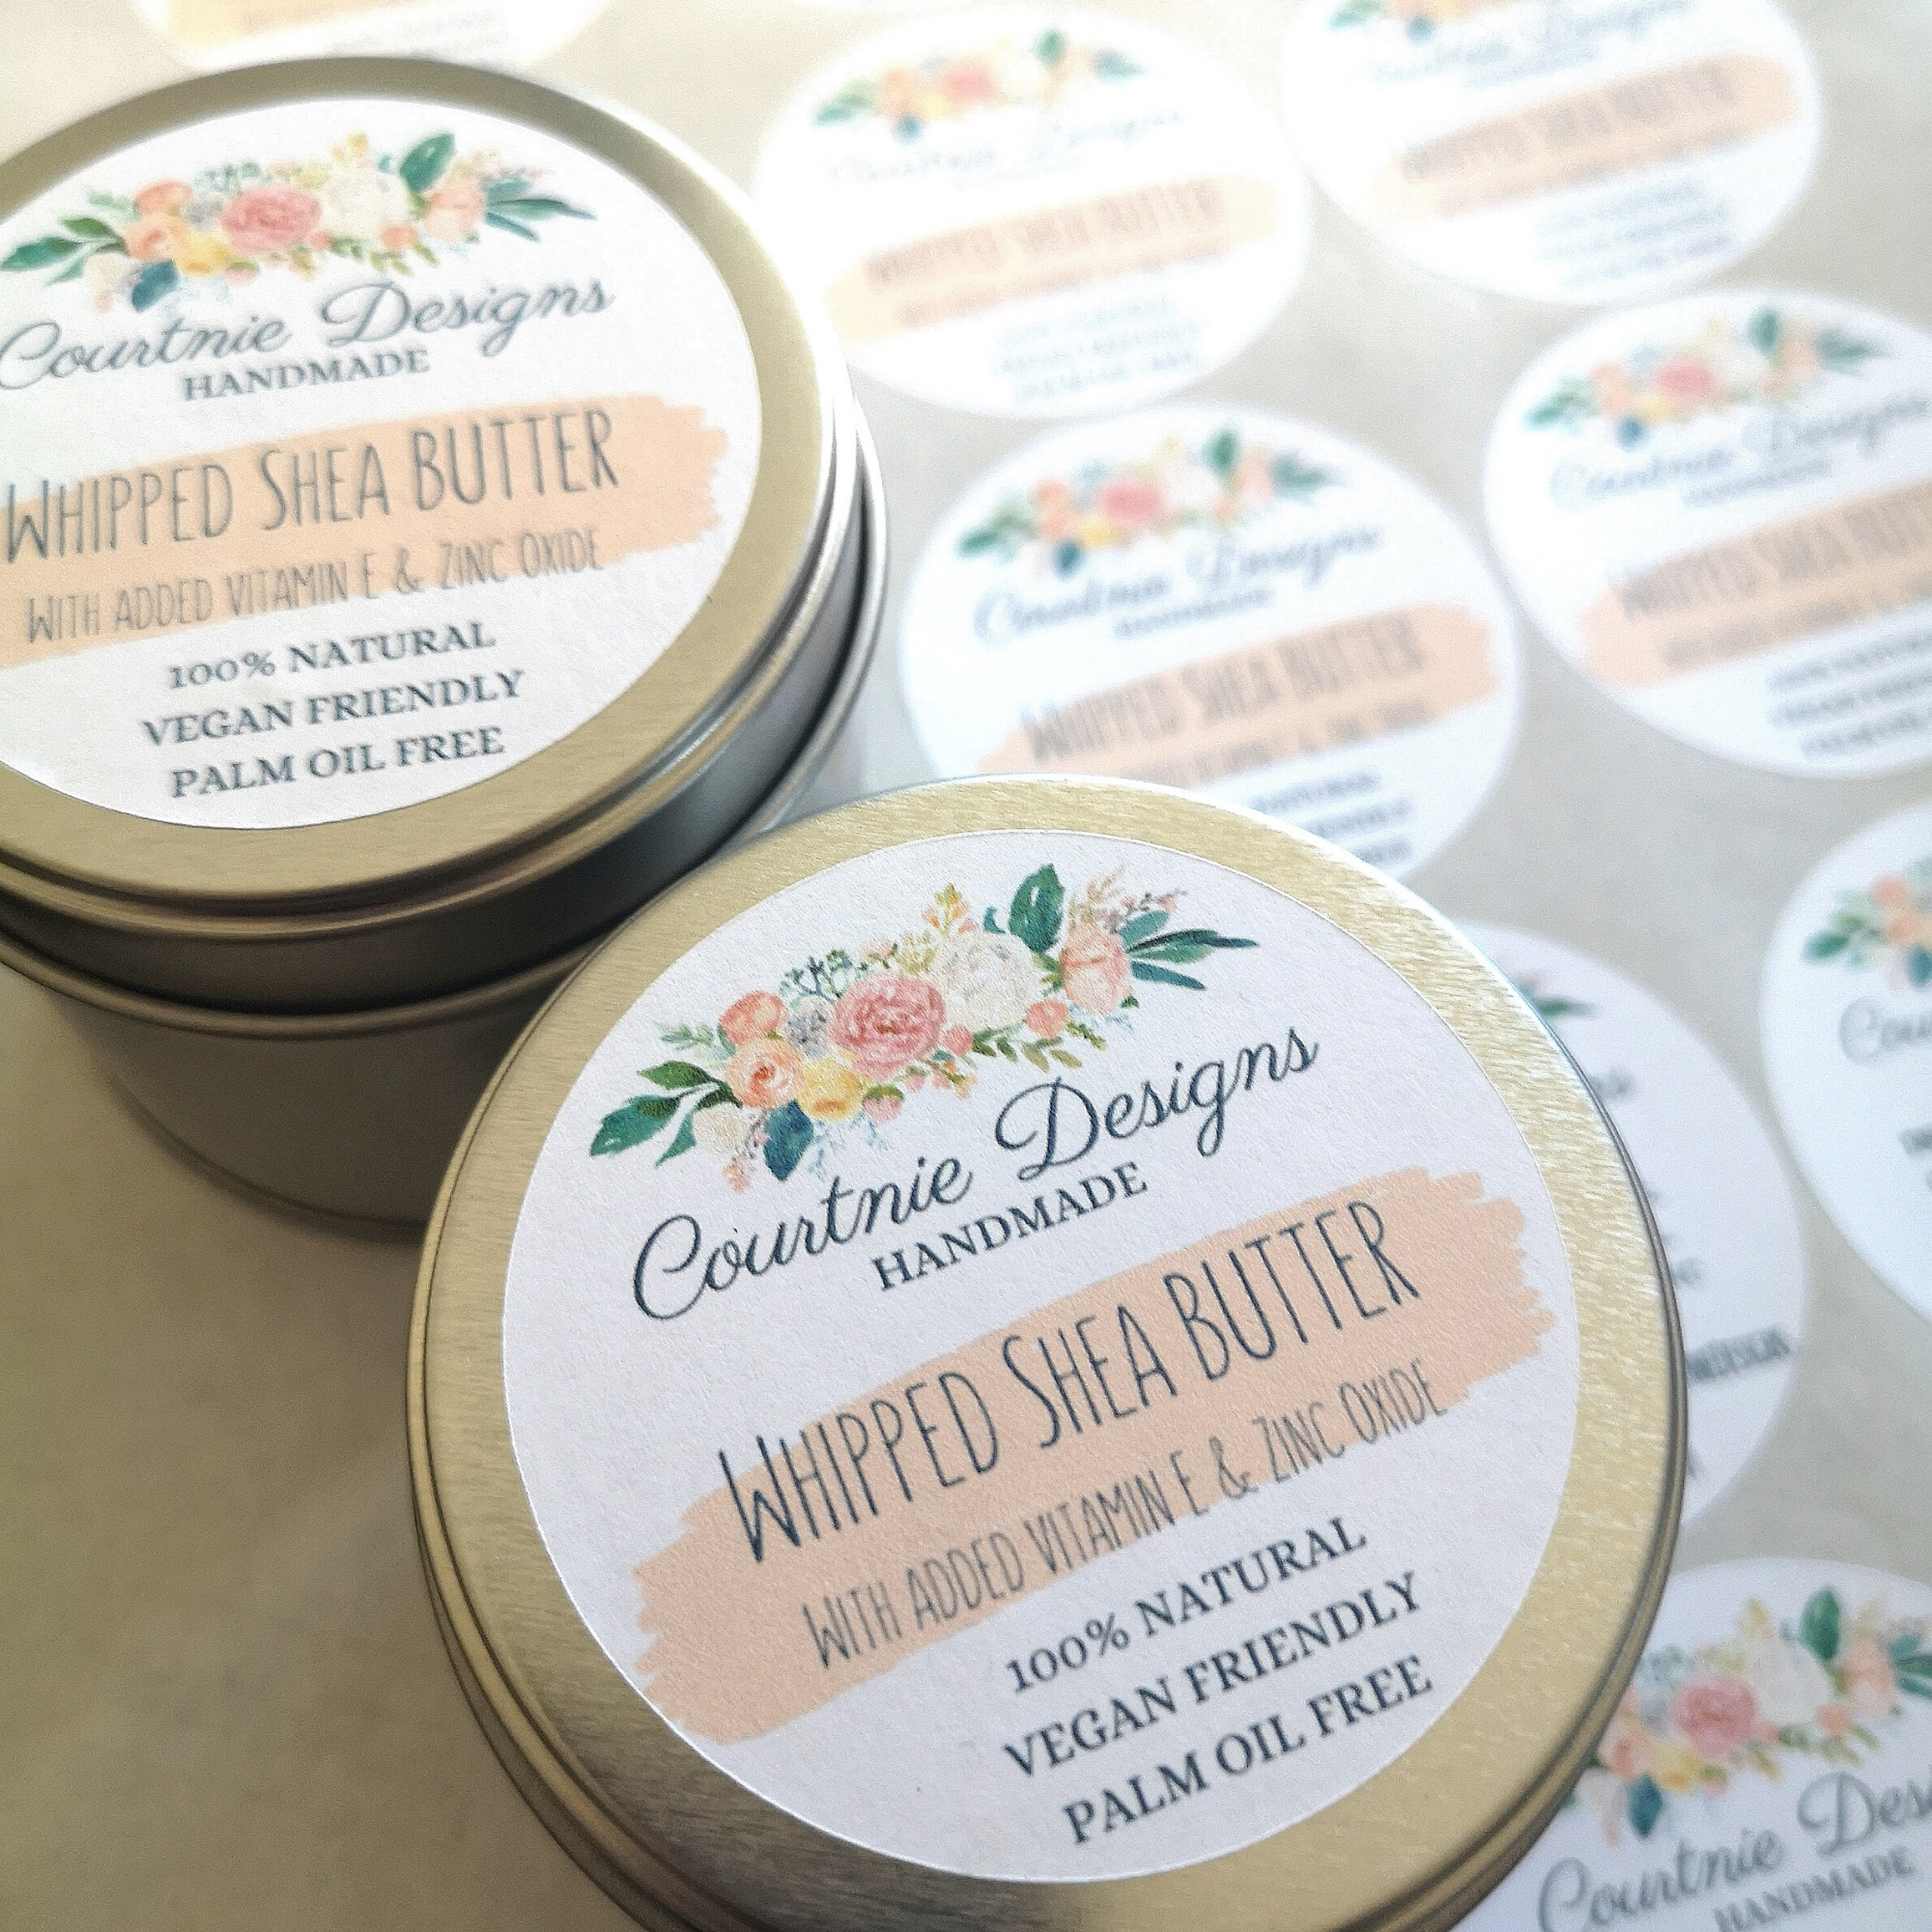 You are currently viewing WHAT’S IN OUR WHIPPED SHEA BUTTER POTS?